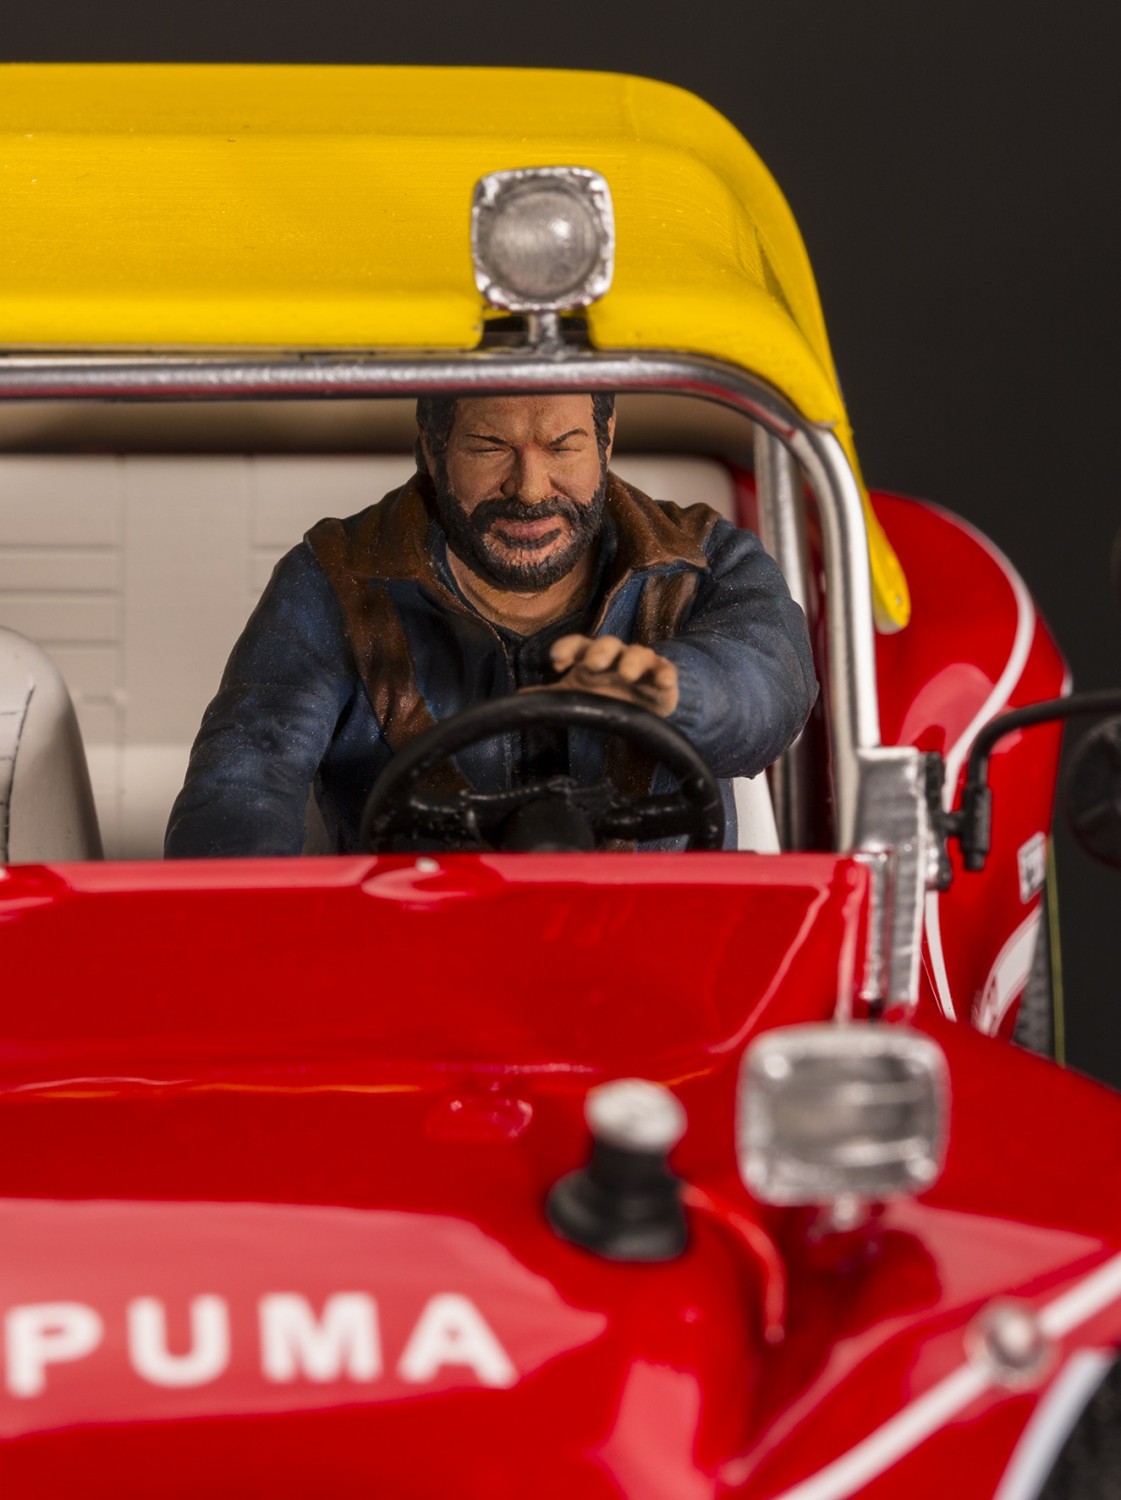 Bud Spencer On Dune Buggy 1:18 Treppe Statue IN Harz By INFINITE STATUE 